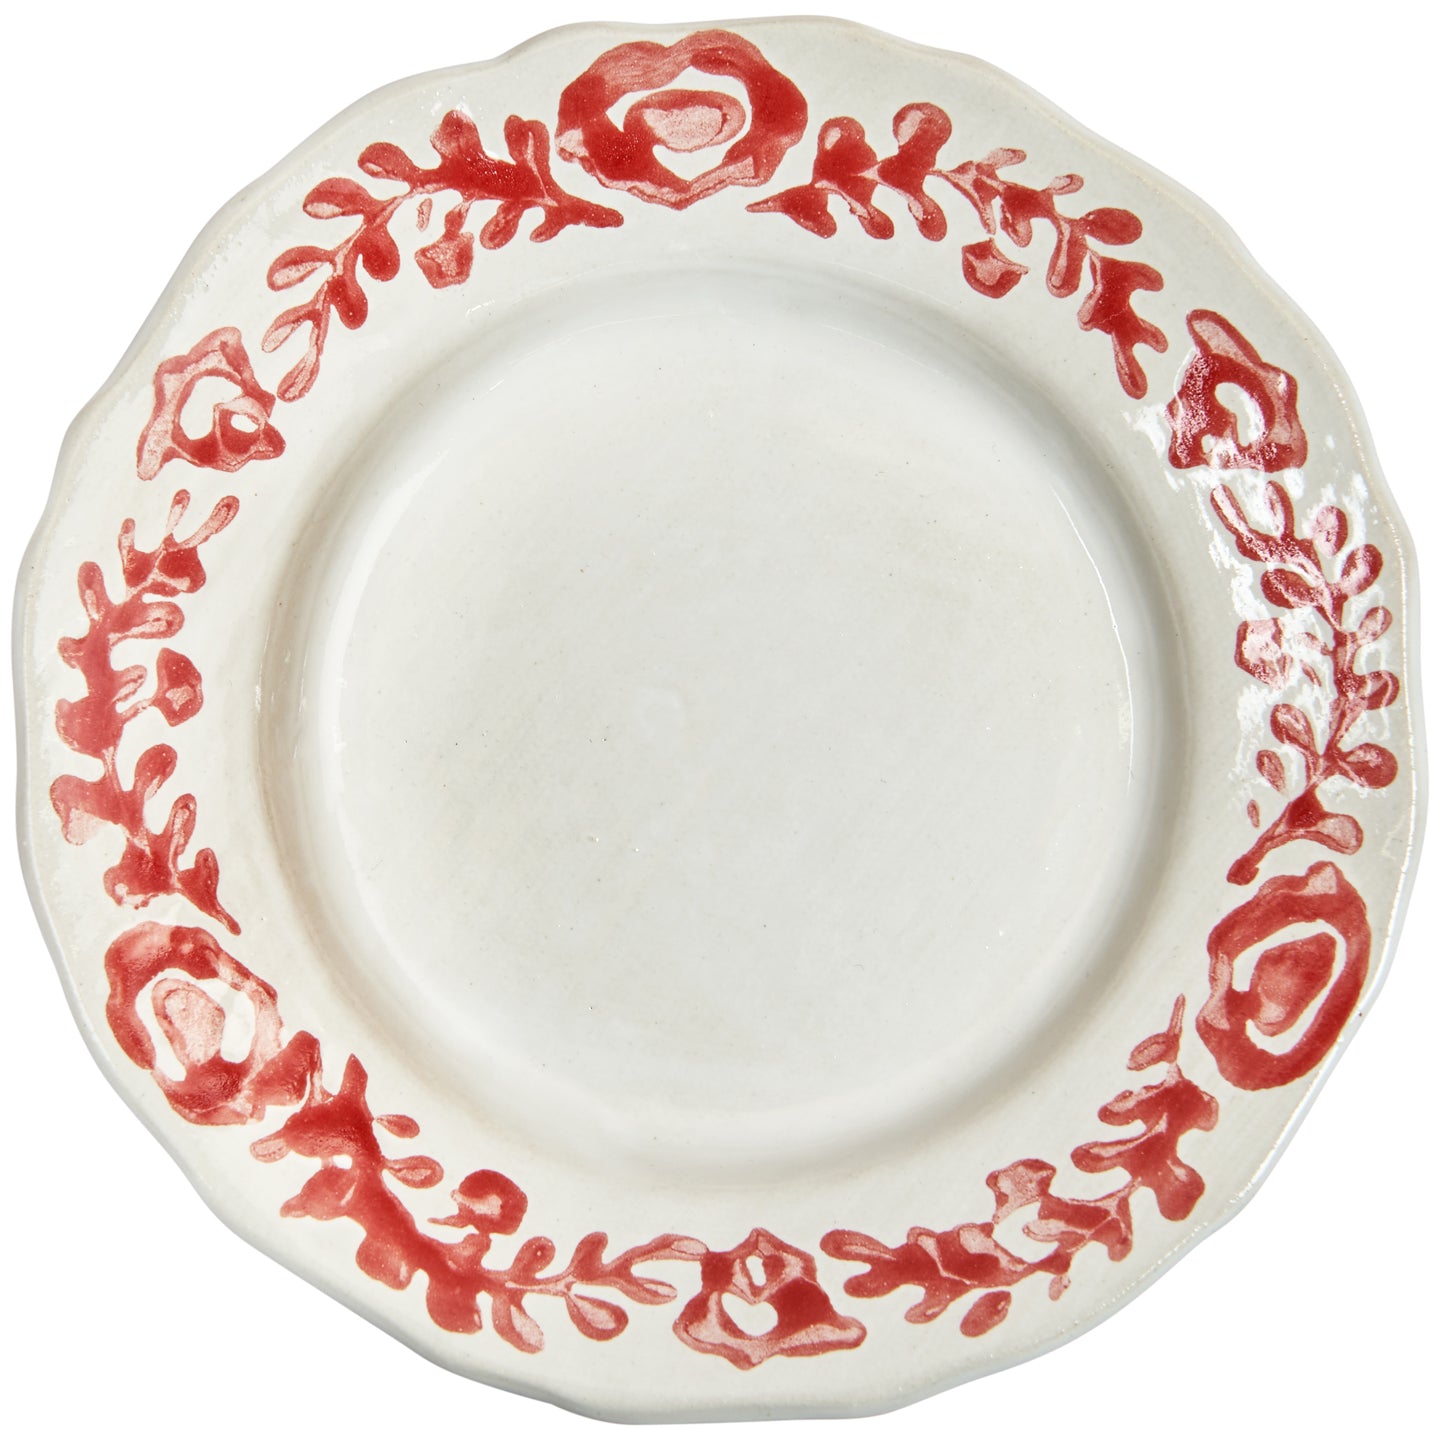 Red Wreath Side Plates (Pair)